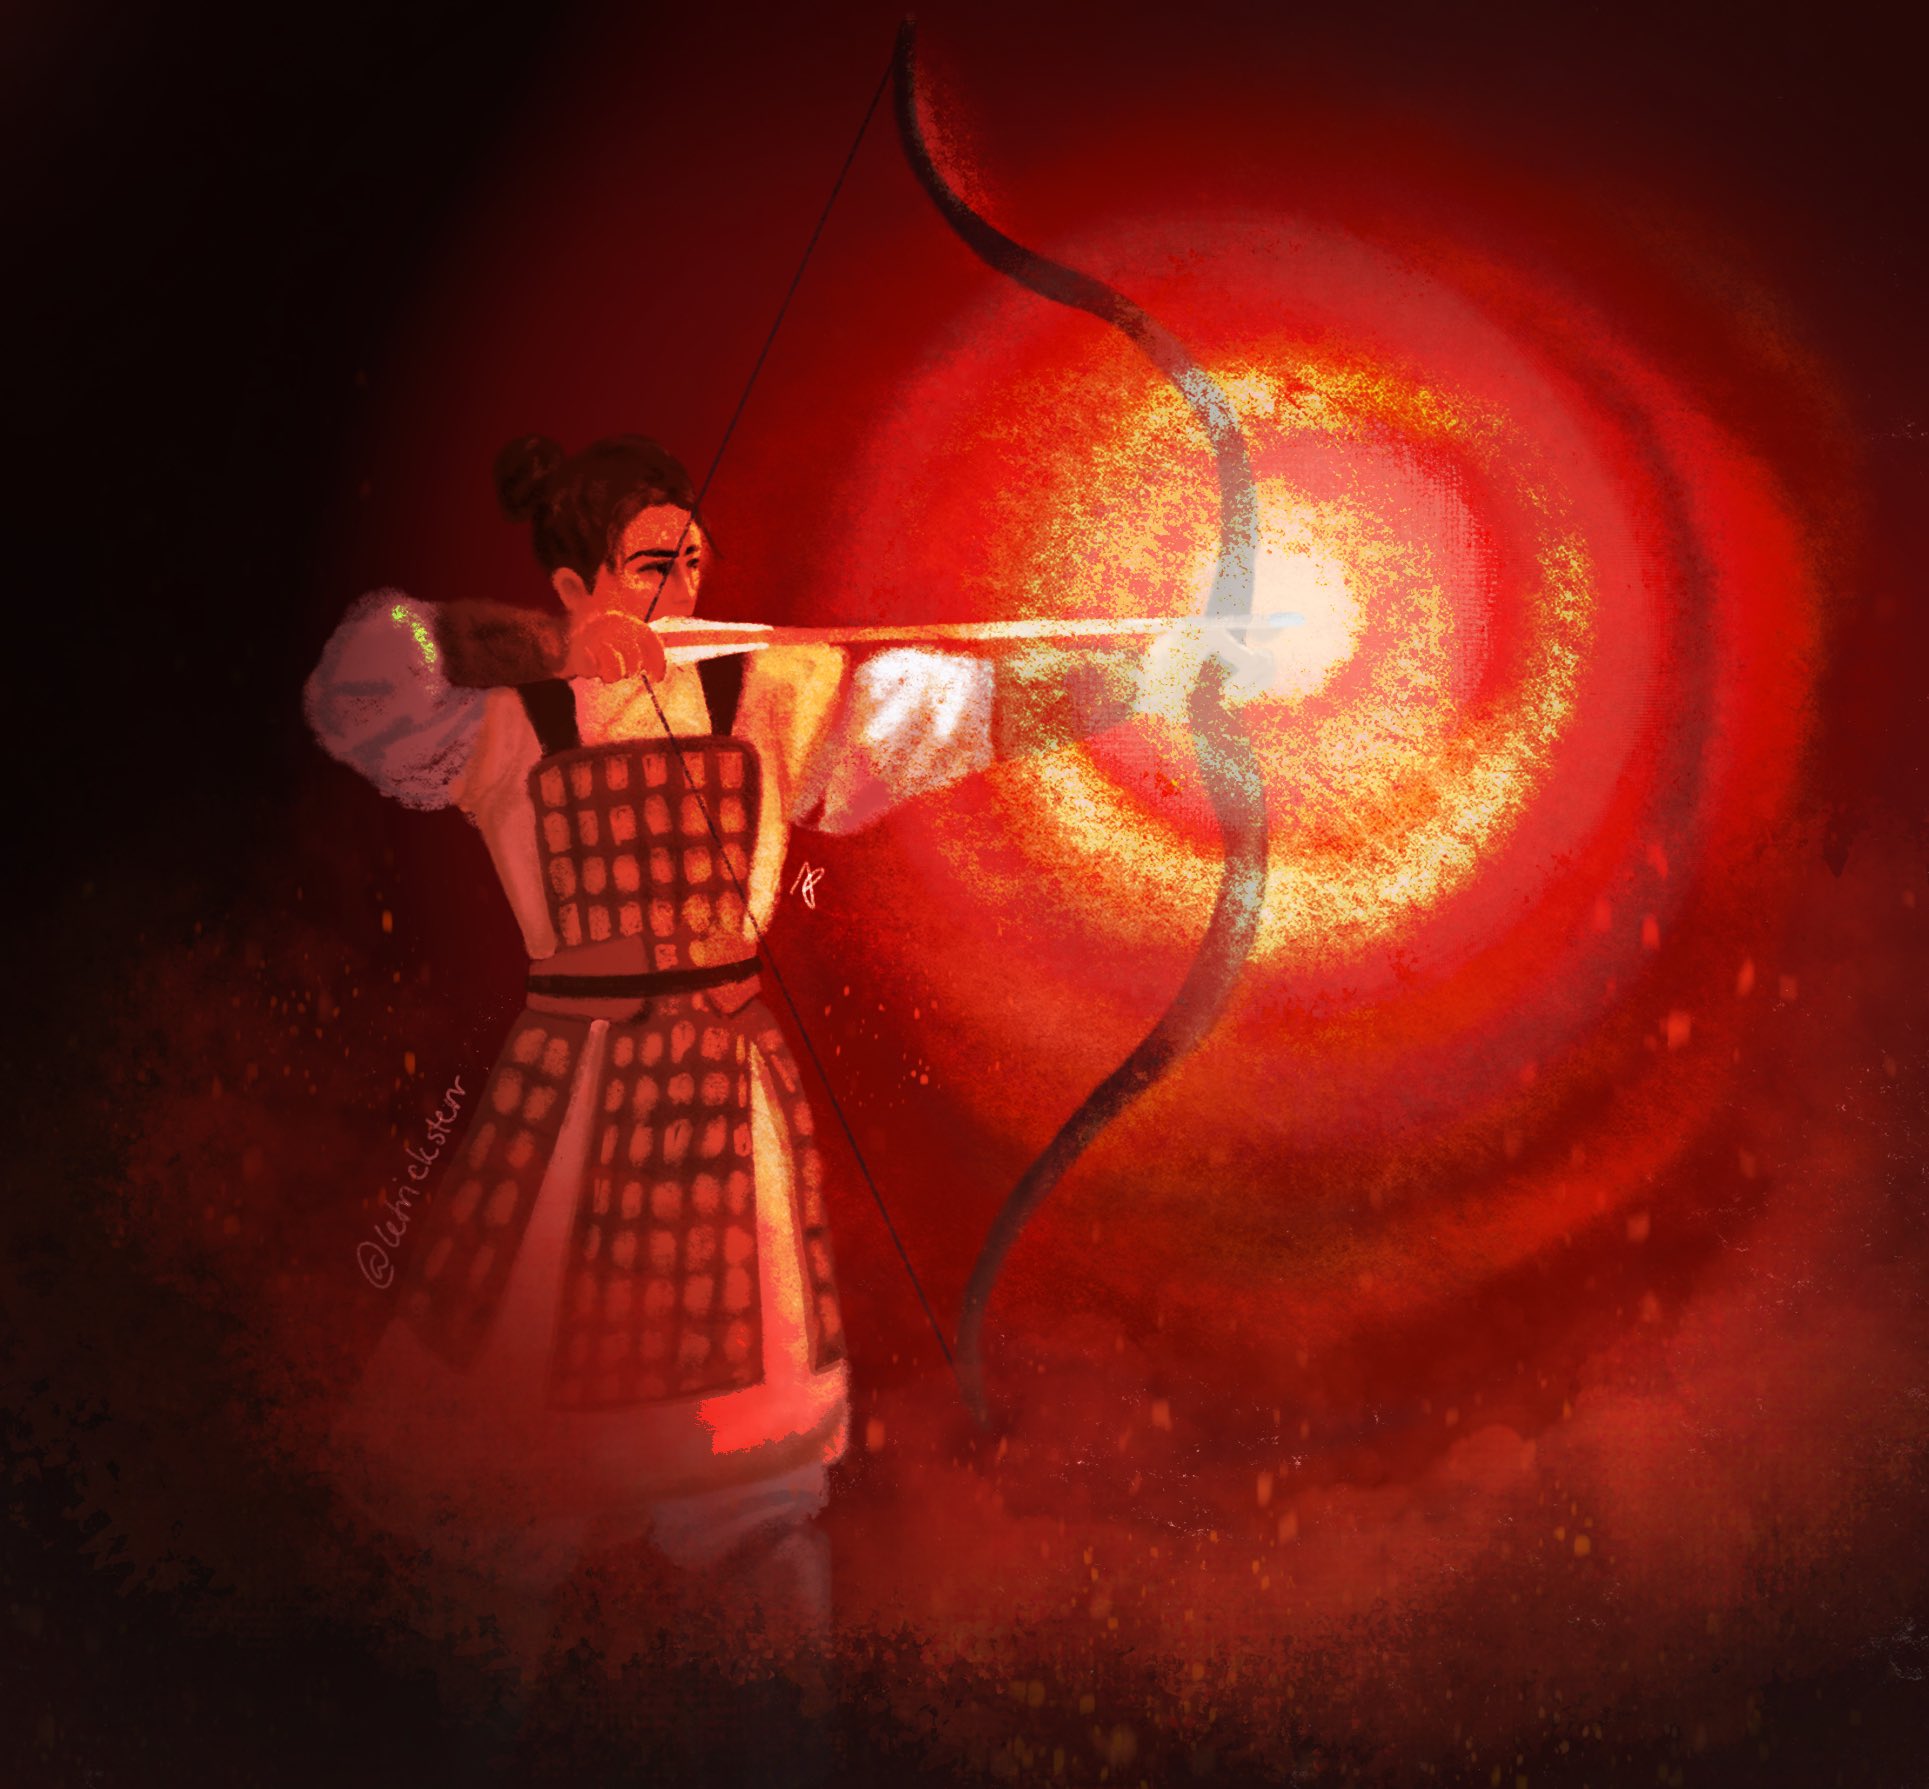 A drawing of Lin Wanyue from Female General and Eldest Princess. Lin Wanyue has tan skin and dark hair pulled into a bun, she is wearing historical Chinese armor. She is standing in profile, drawing back a bow, the arrow is generating light like a red sun which lights the drawing.